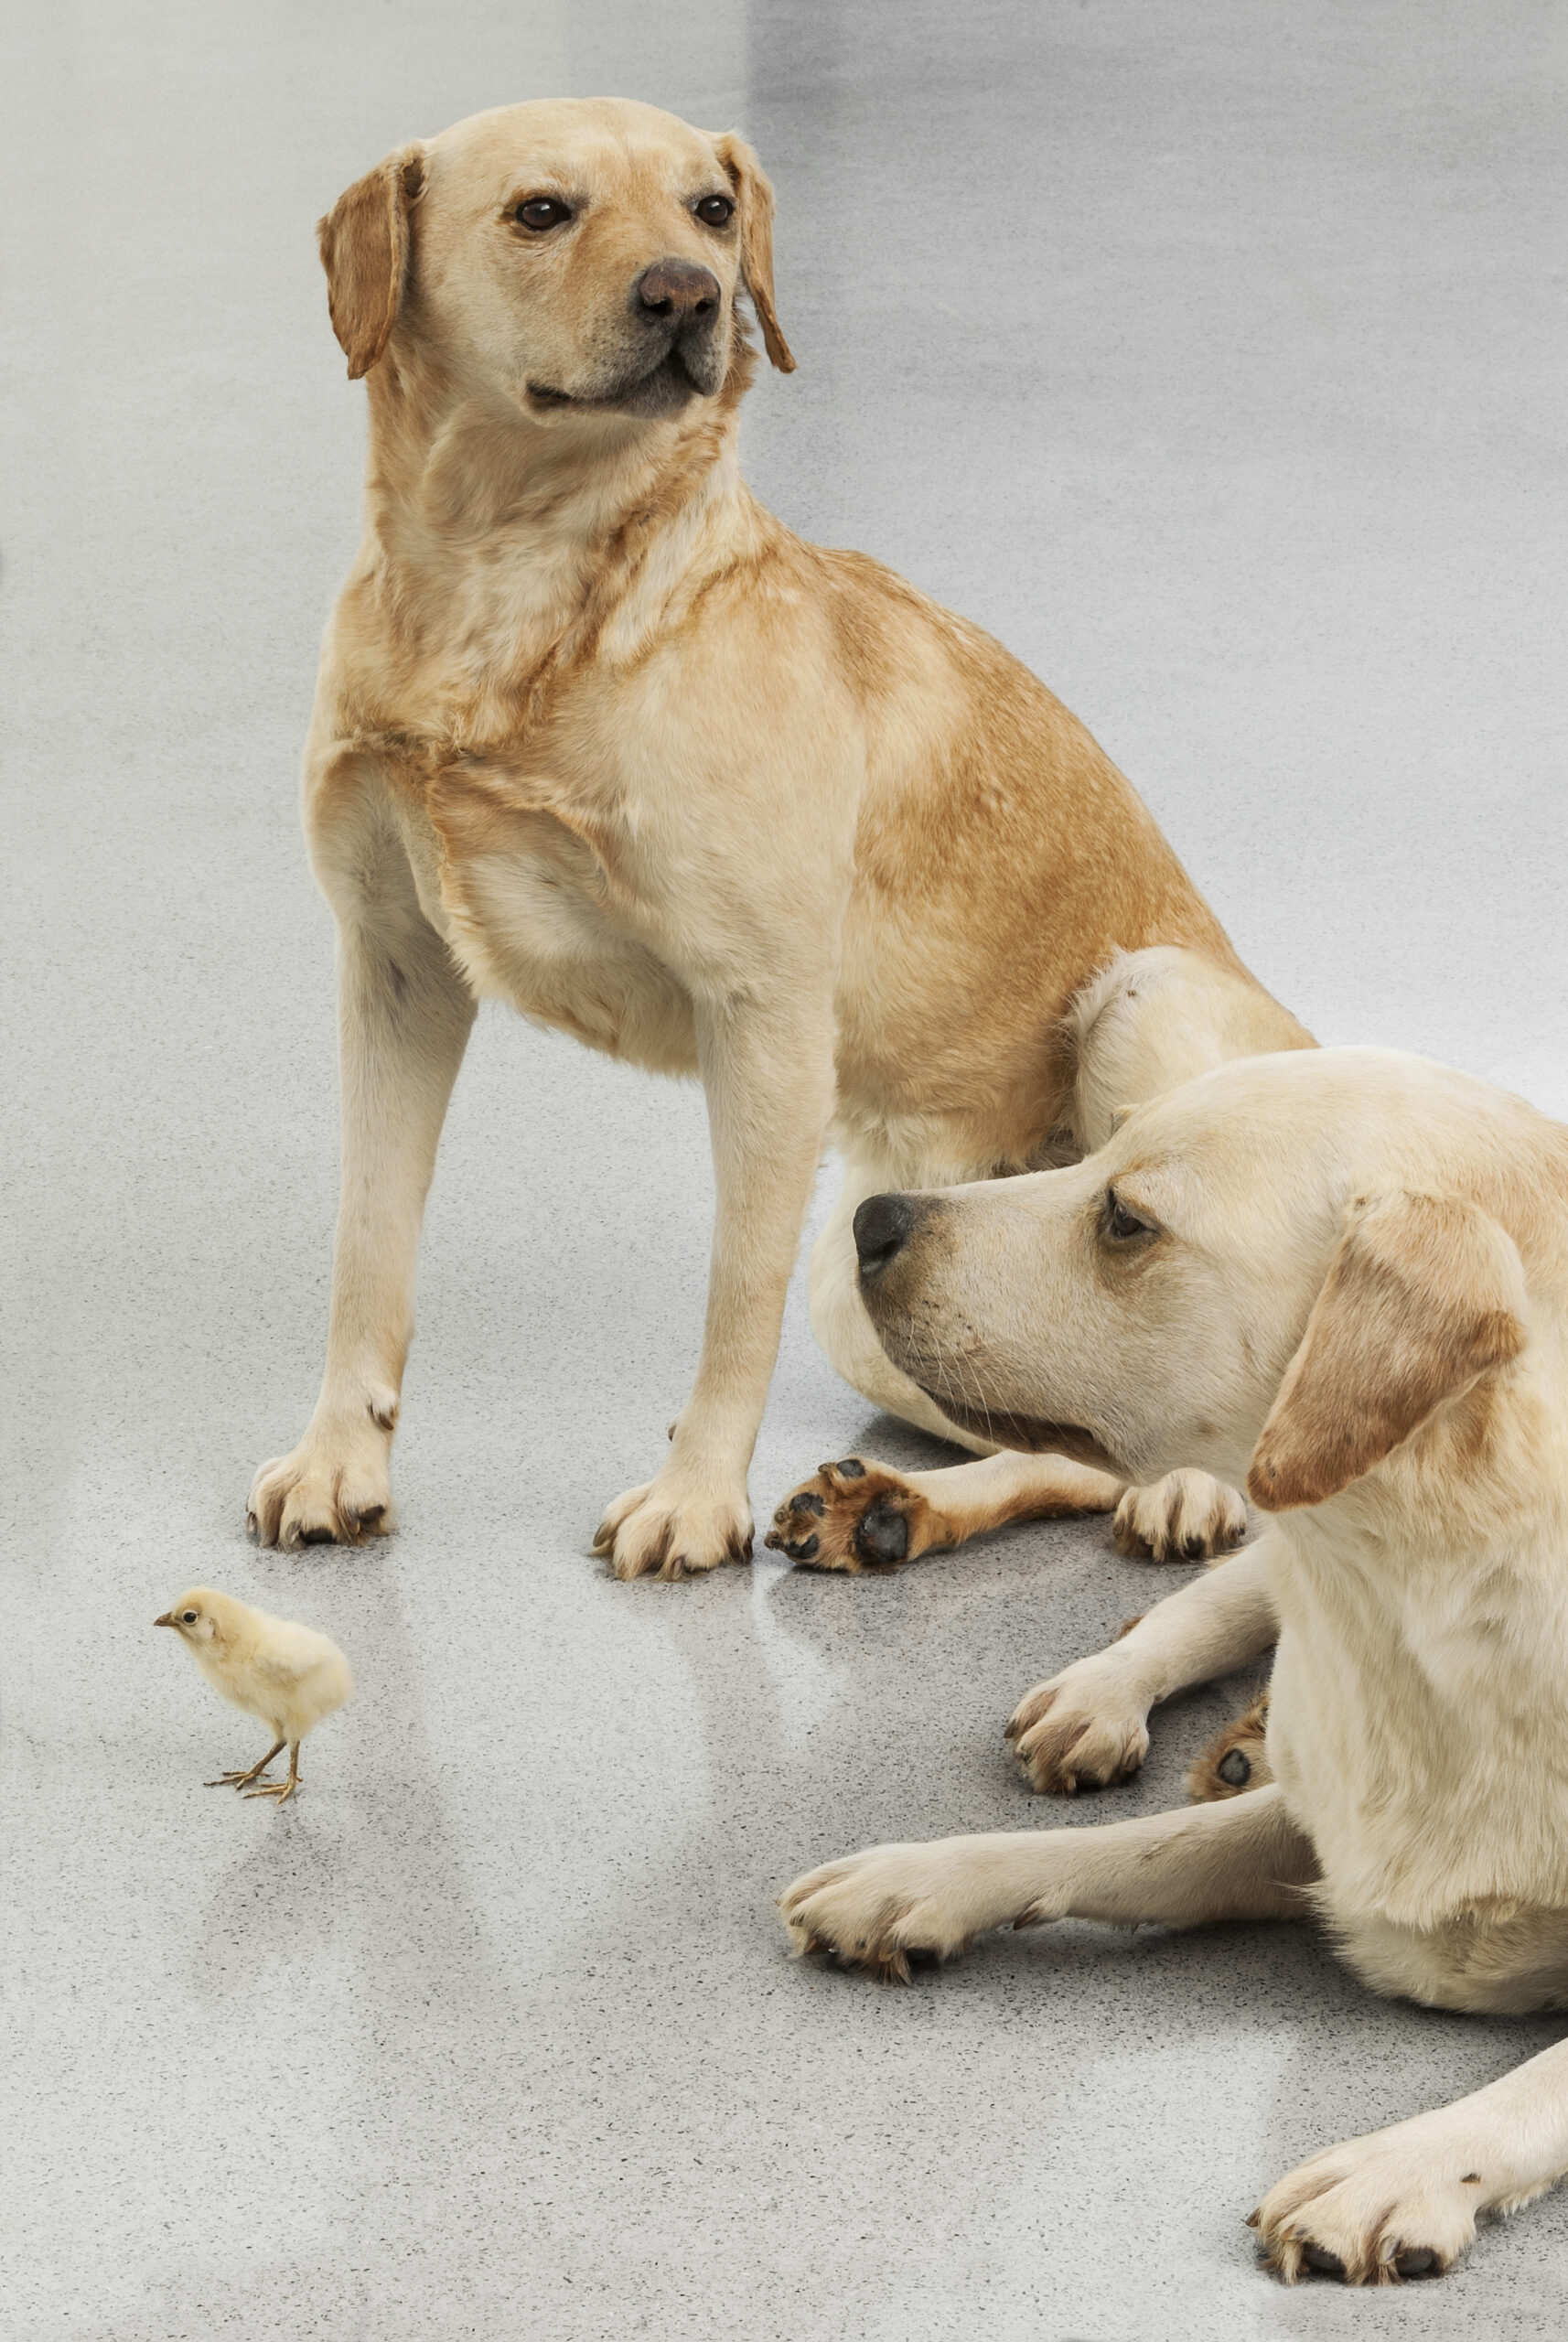 Maurizio Cattelan, Untitled, 2007 (detail) , Taxidermied labrador dogs, chick. Variable dimensions, Installation view